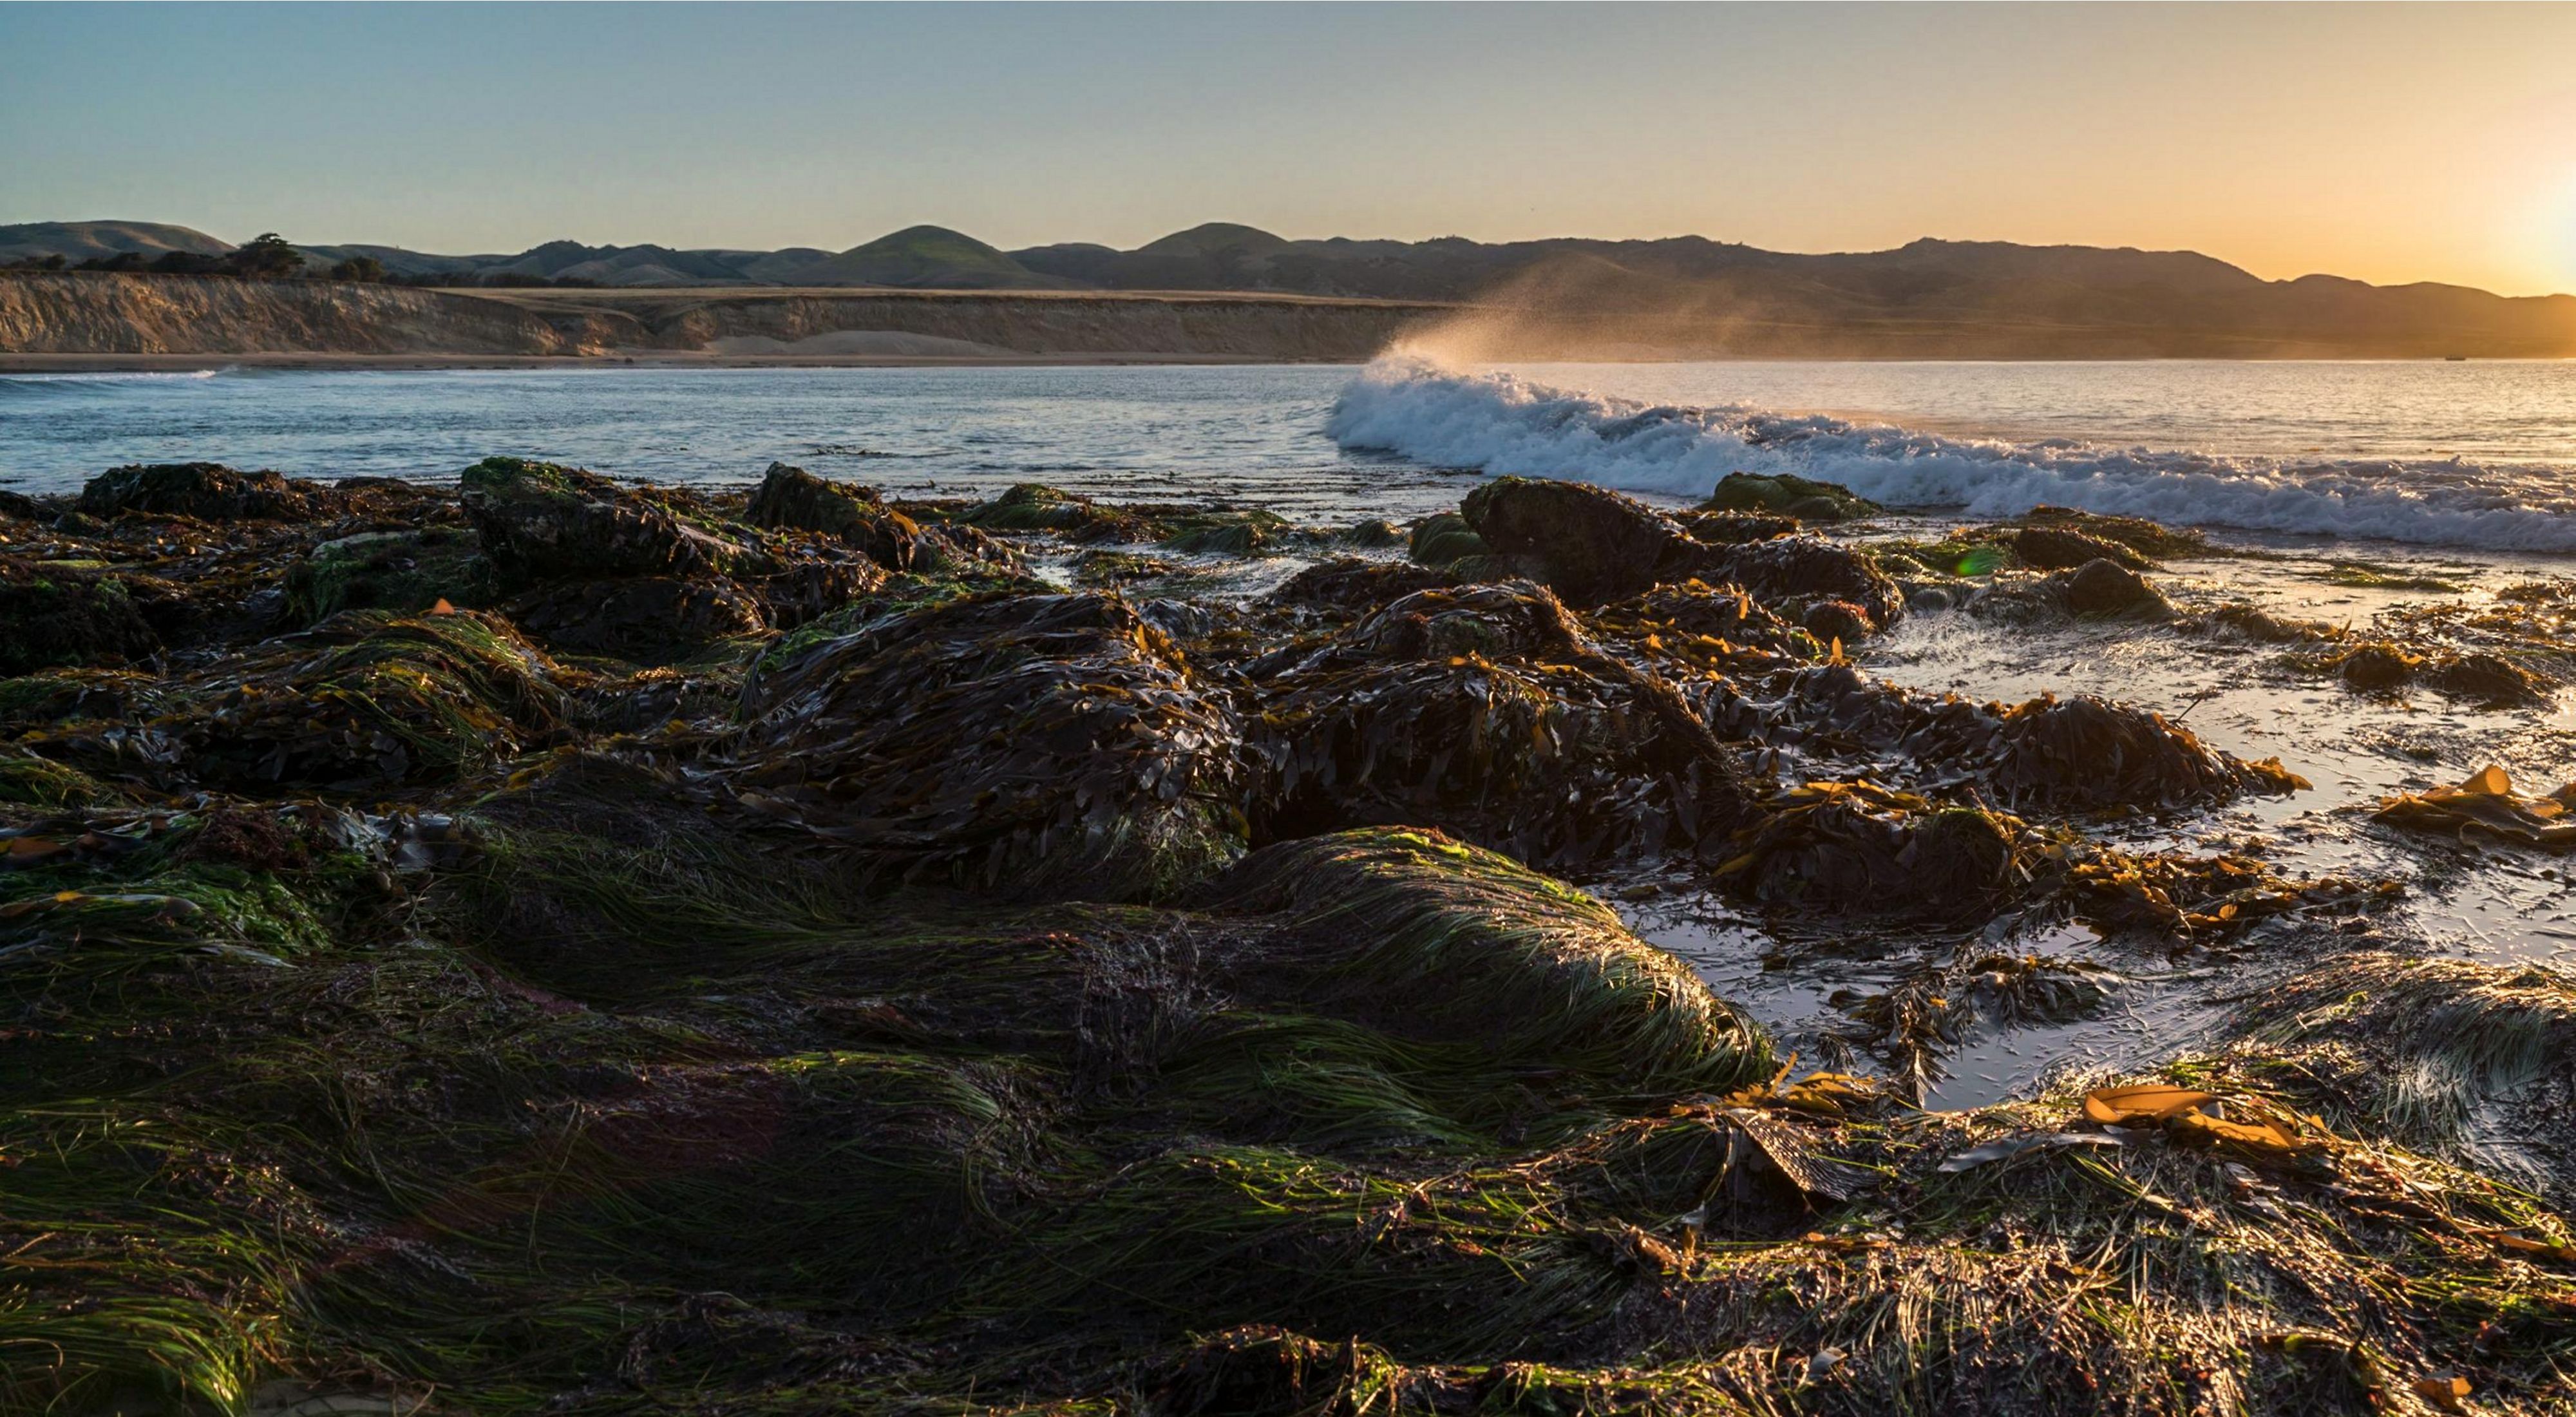 Wave approaching ocean shore with tidal pool in the foreground and sun setting over a ridgeline in the distance.